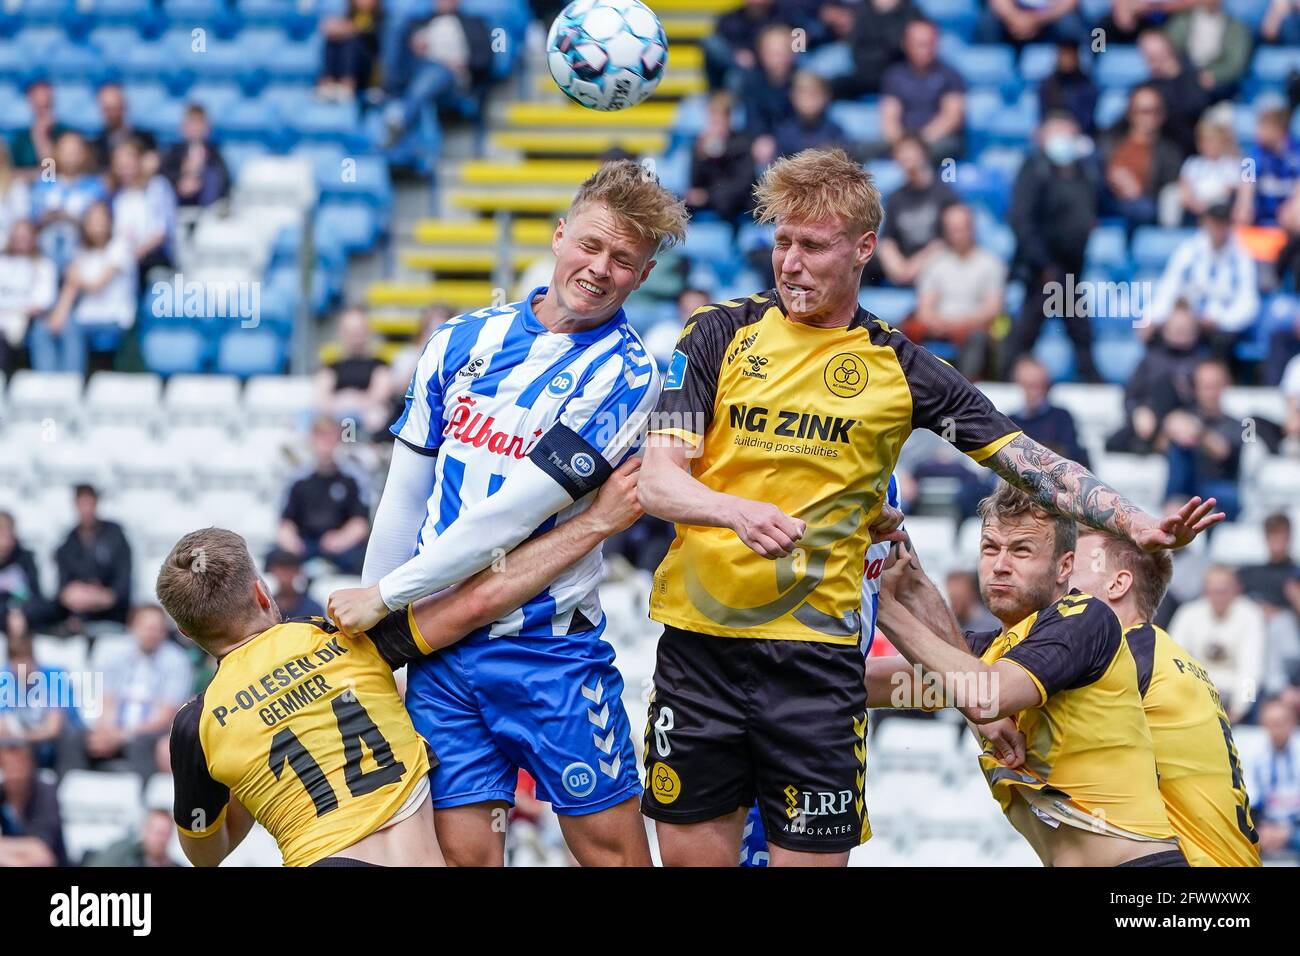 Odense, Denmark. 24th May, 2021. Bjarke Jacobsen (8) of AC Horsens and  Jeppe Tverskov (6) of Odense Boldklub seen during the 3F Superliga match  between Odense Boldklub and AC Horsens at Nature